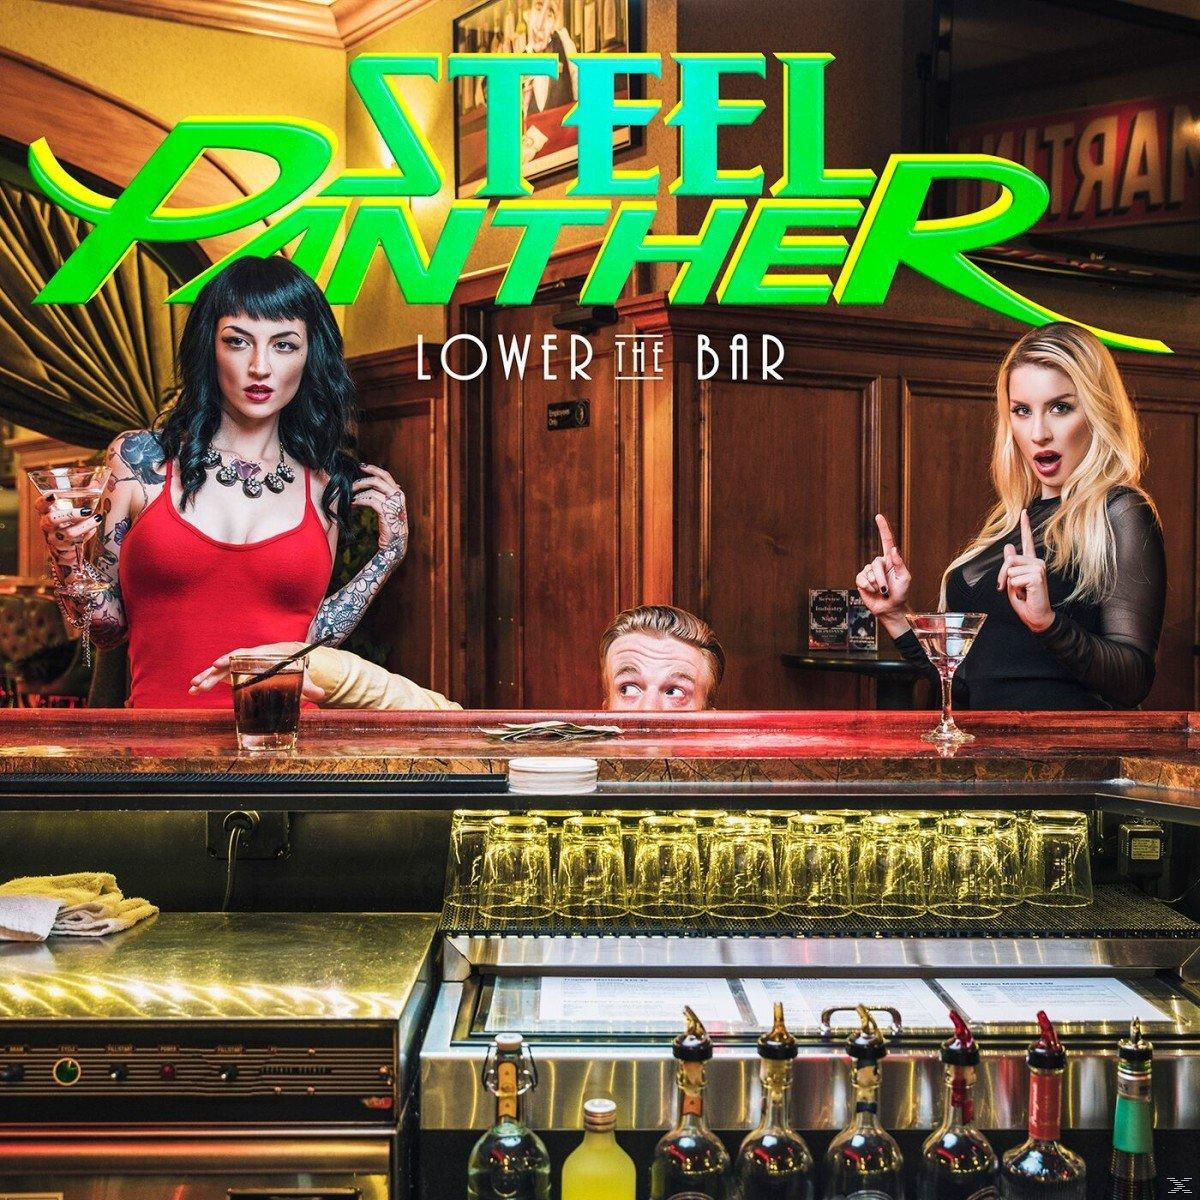 Steel Panther - (DELUXE THE (CD) BAR LOWER - EDITION)